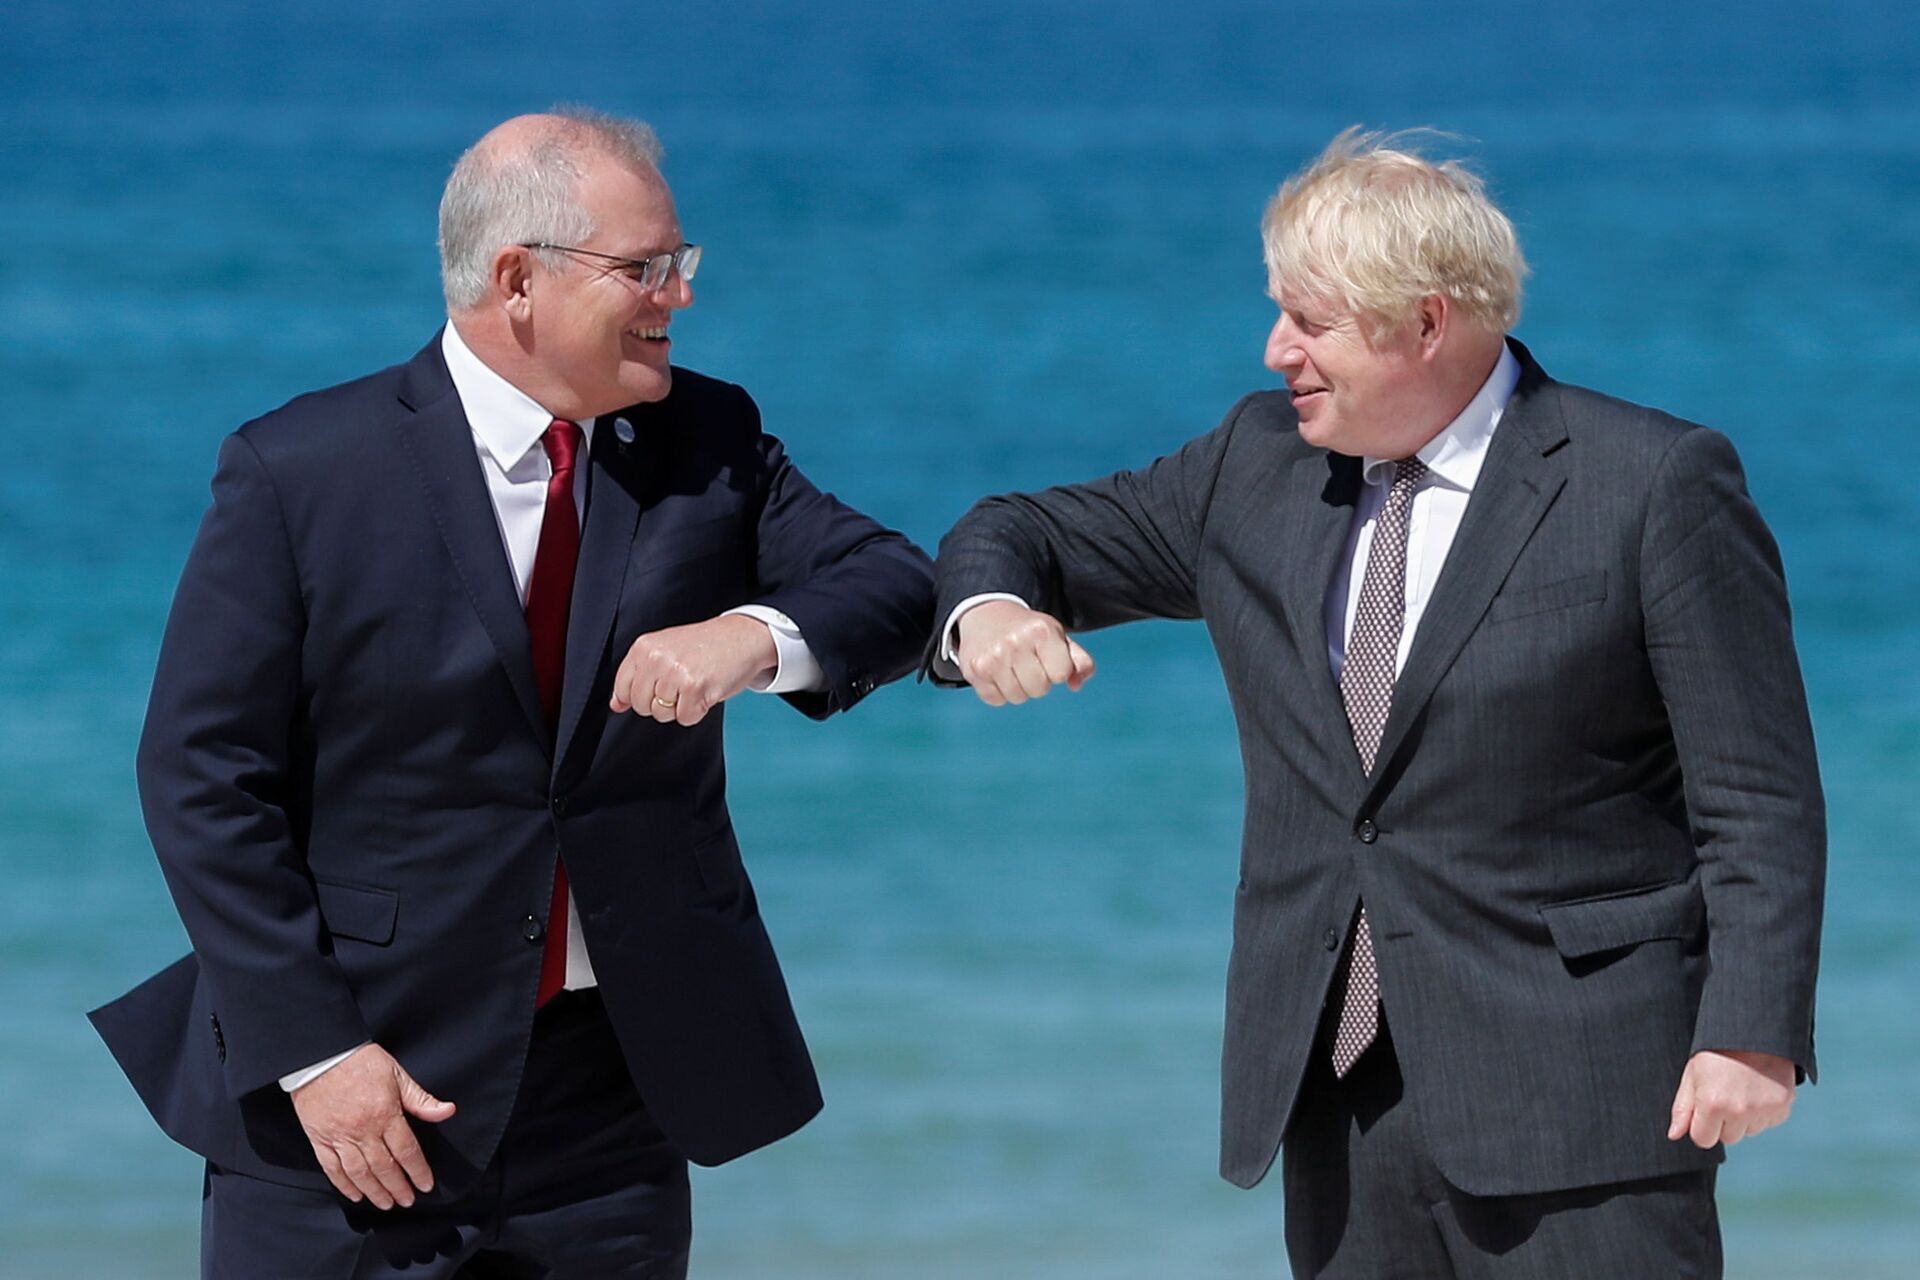 Britain's Prime Minister Boris Johnson greets Australia's Prime Minister Scott Morrison during an official welcome at the G7 summit in Carbis Bay, Cornwall, Britain, June 12, 2021.  - Sputnik International, 1920, 07.09.2021